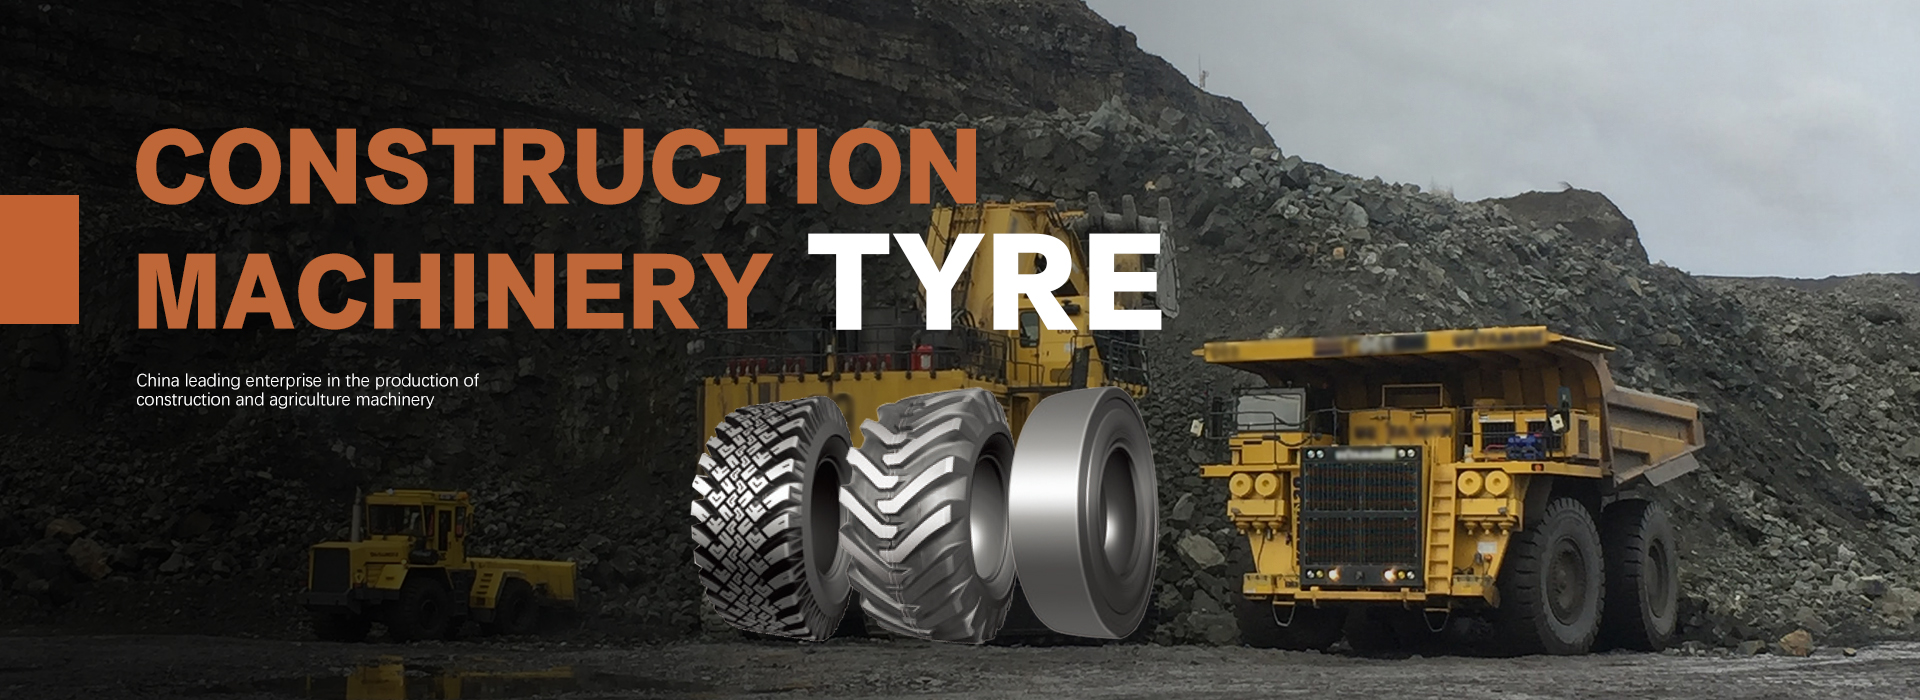 Construction Machinery Tyre